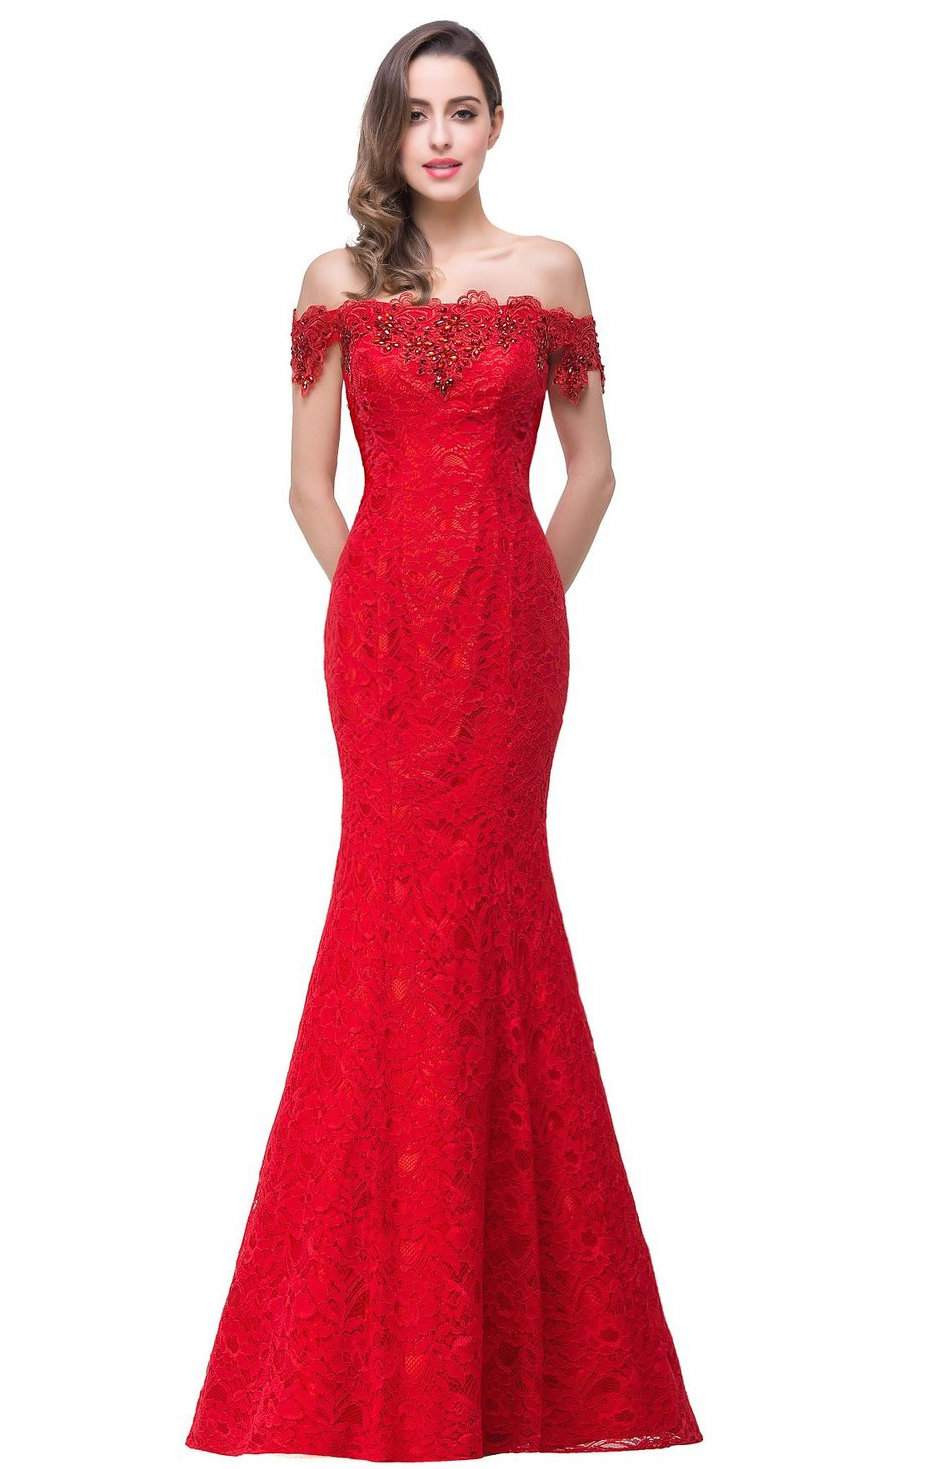 Red Dresses For Wedding
 25 Red Wedding Dresses You’ll Absolutely Love 2018